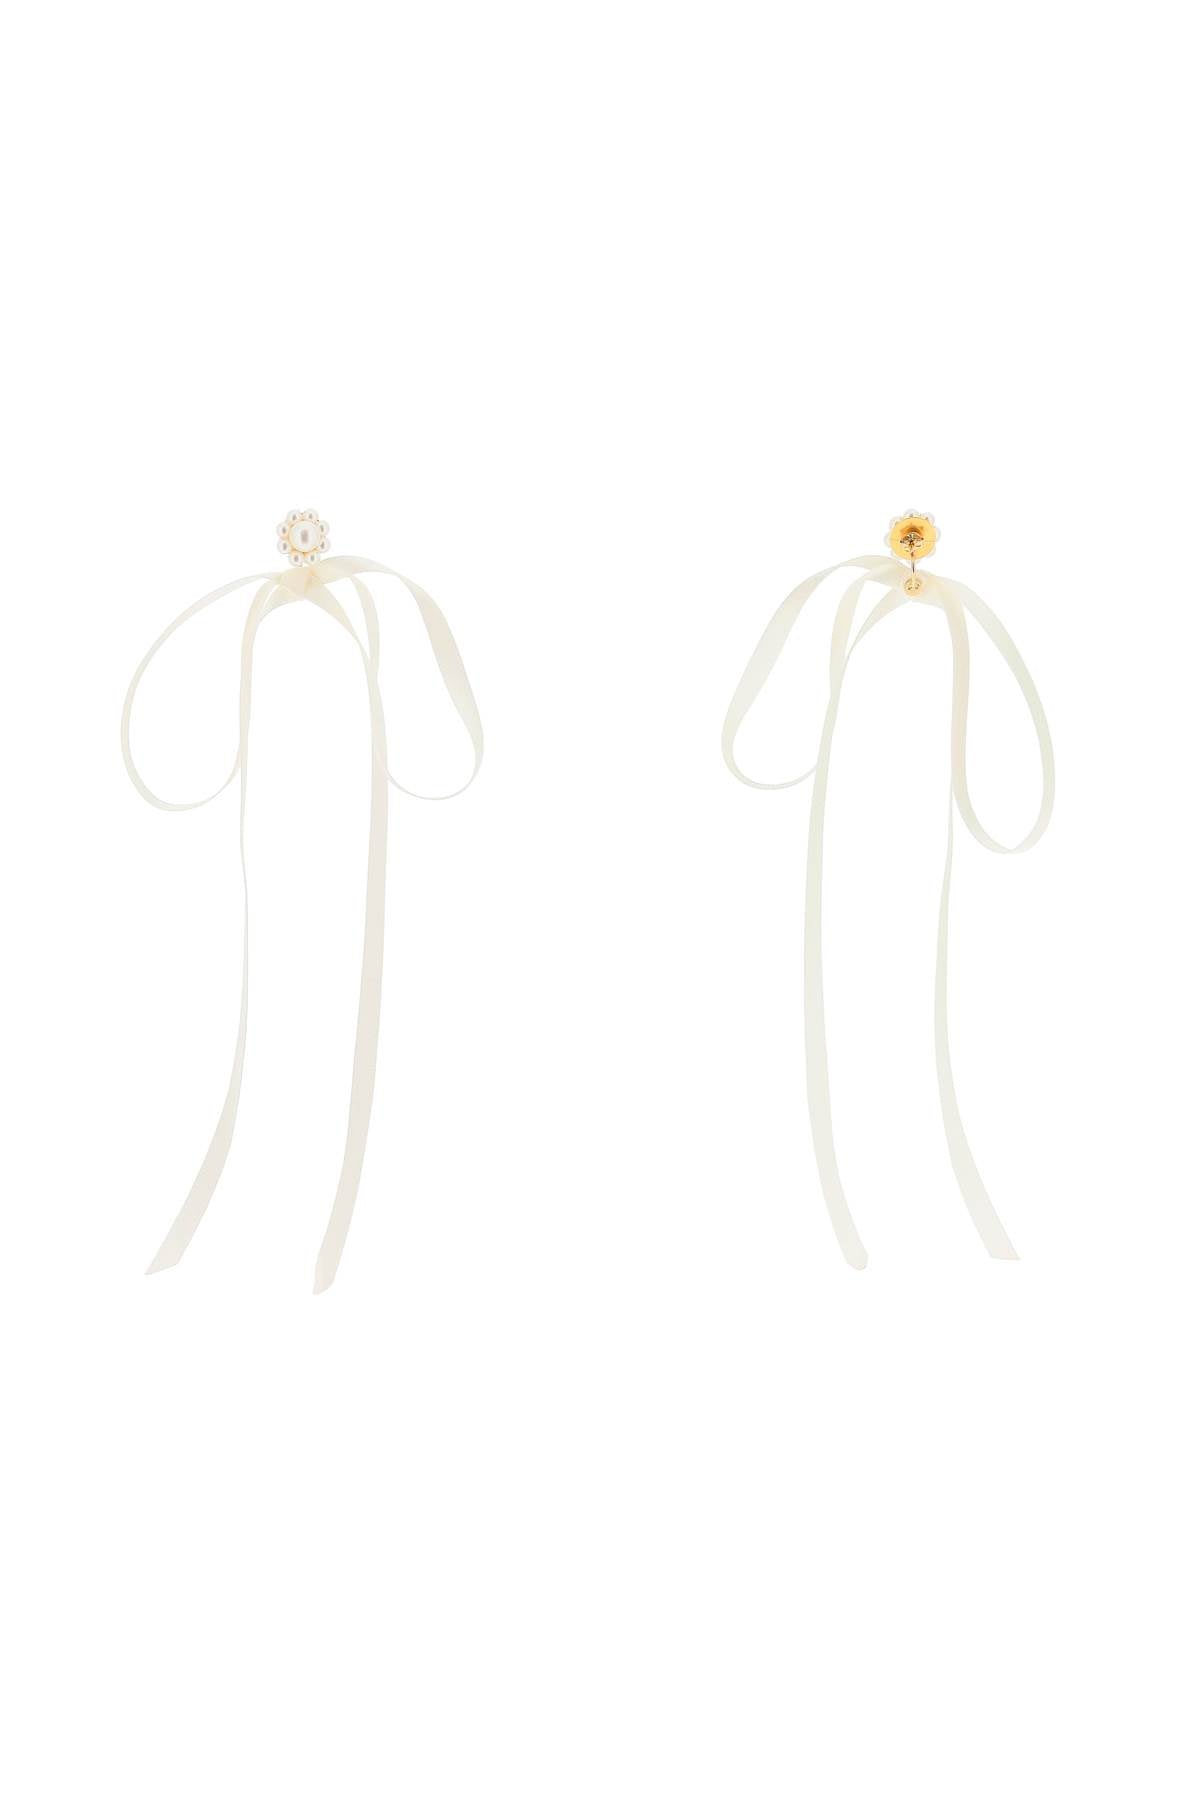 Simone Rocha Button Pearl Earrings With Bow Detail.   White